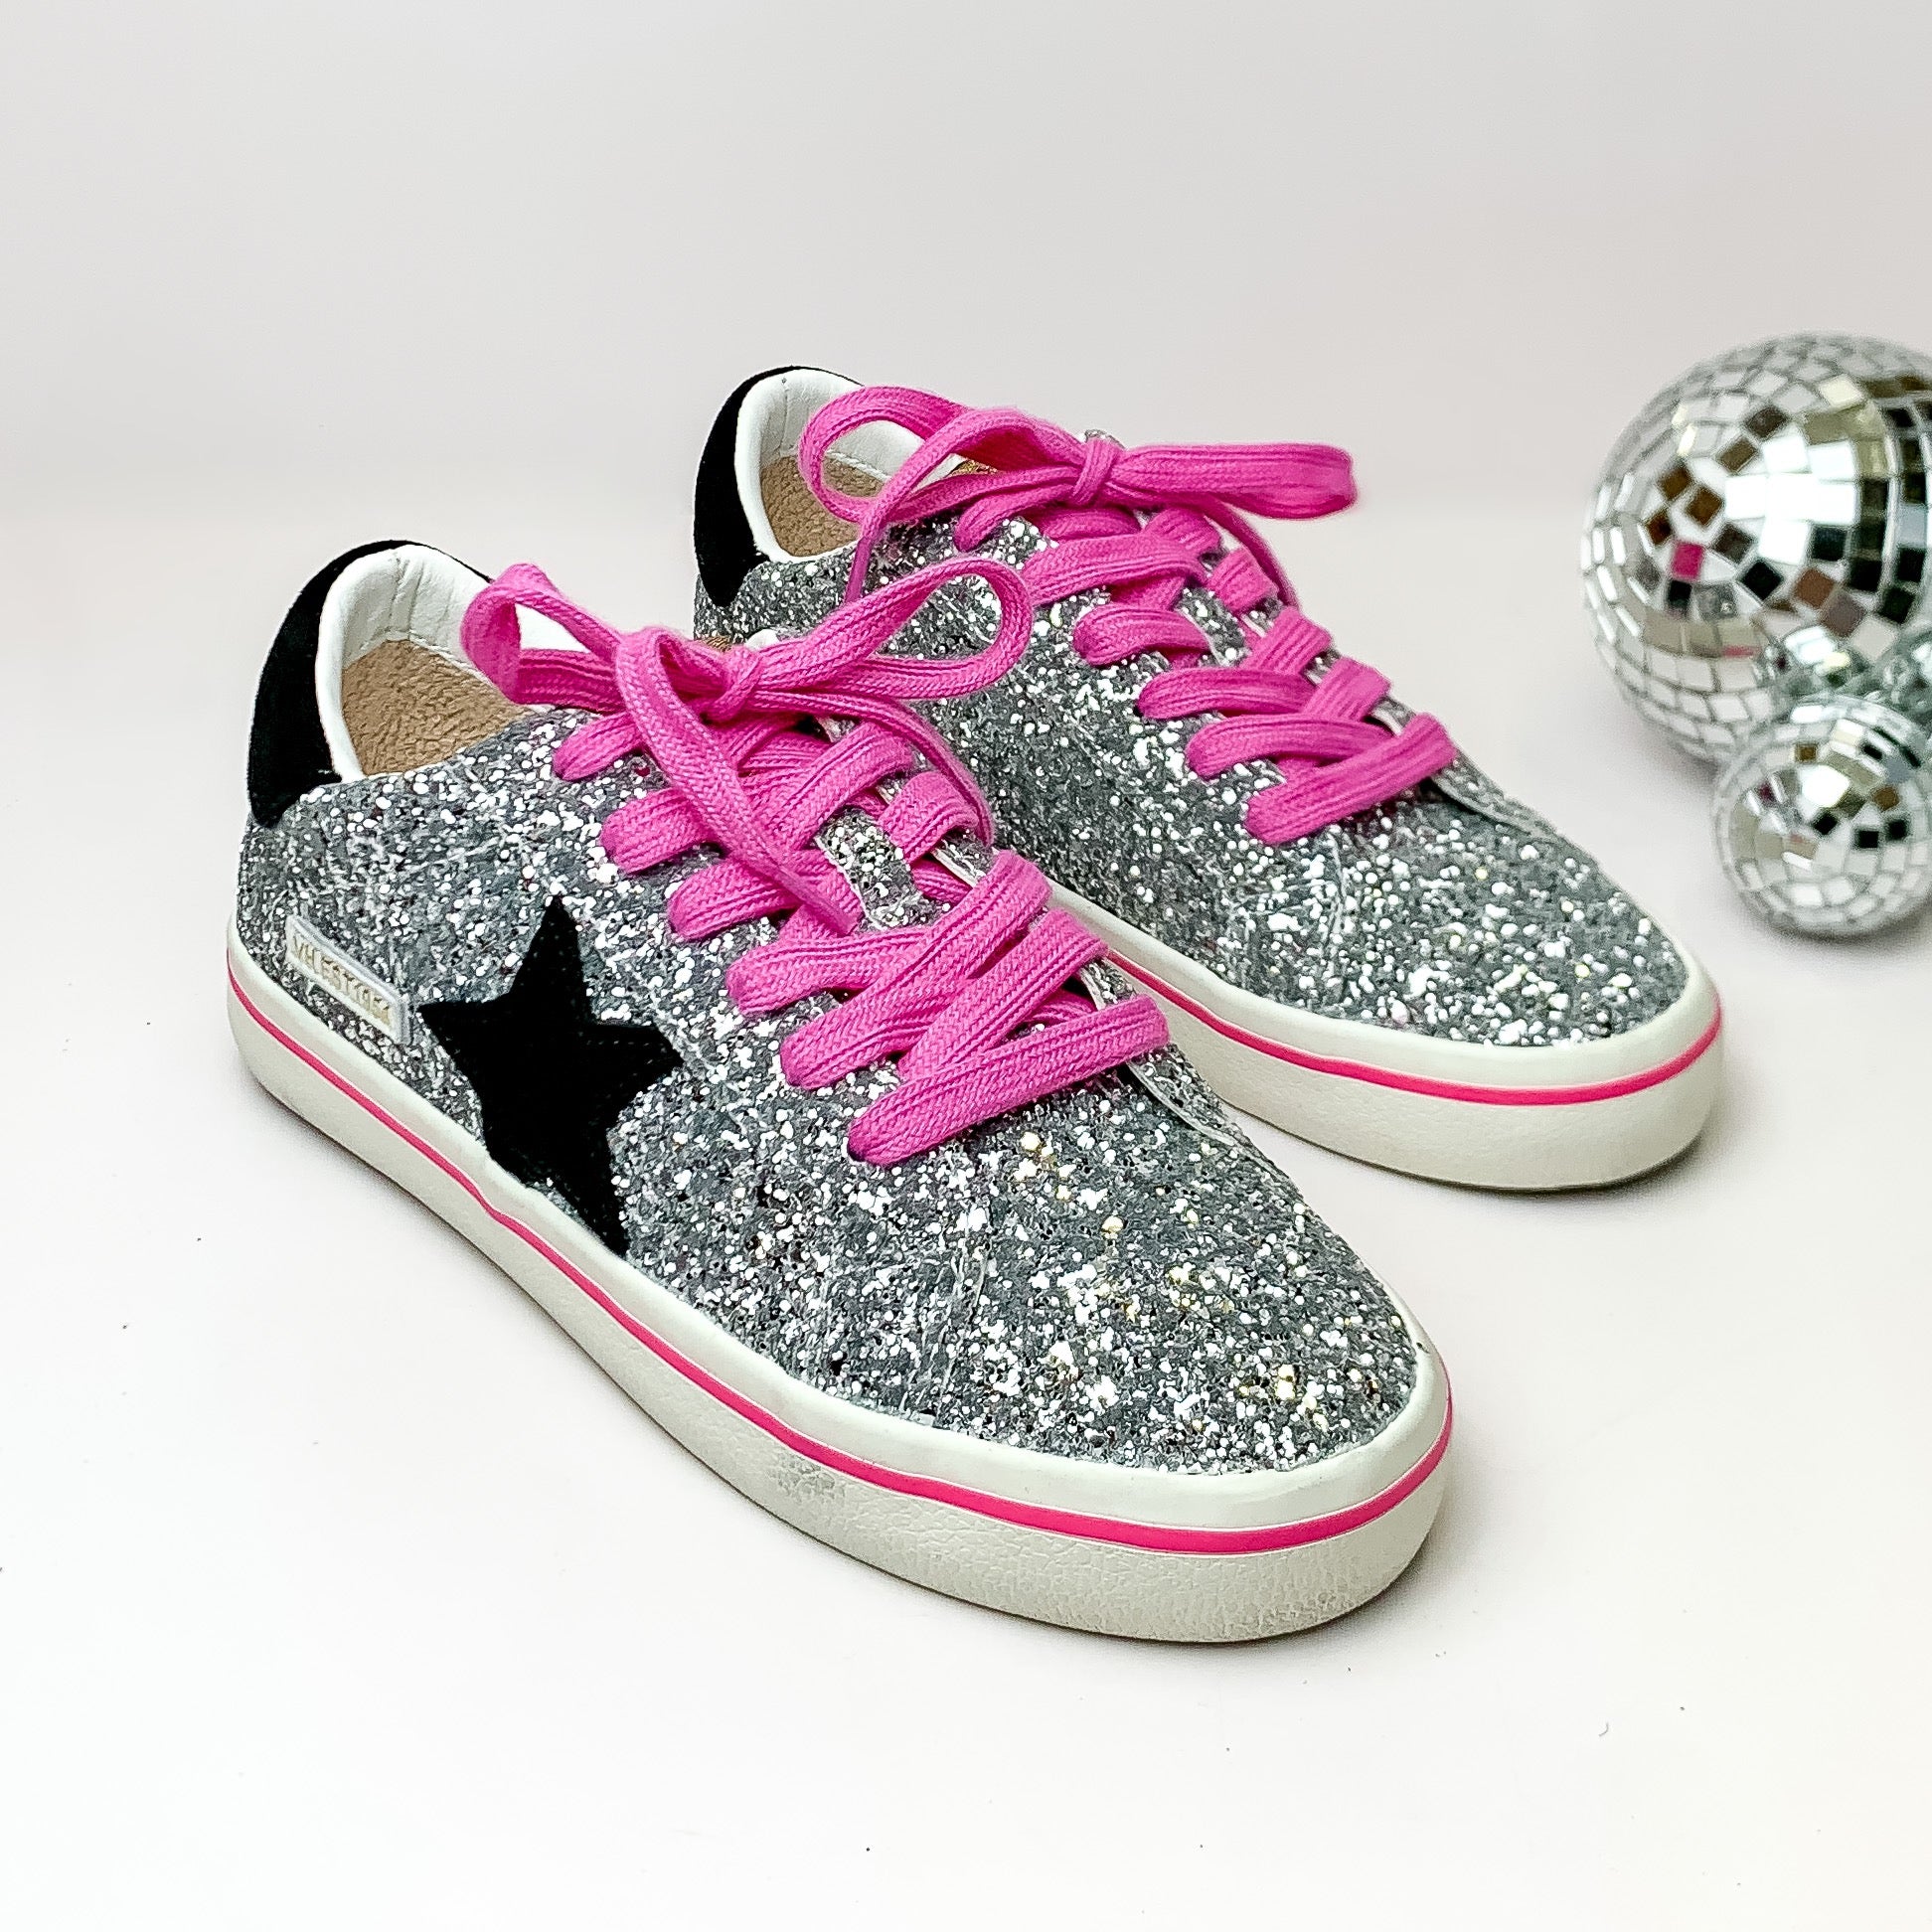 Vintage Havana | Flair 6 Sneakers in Silver Glitter Multi - Giddy Up Glamour Boutique